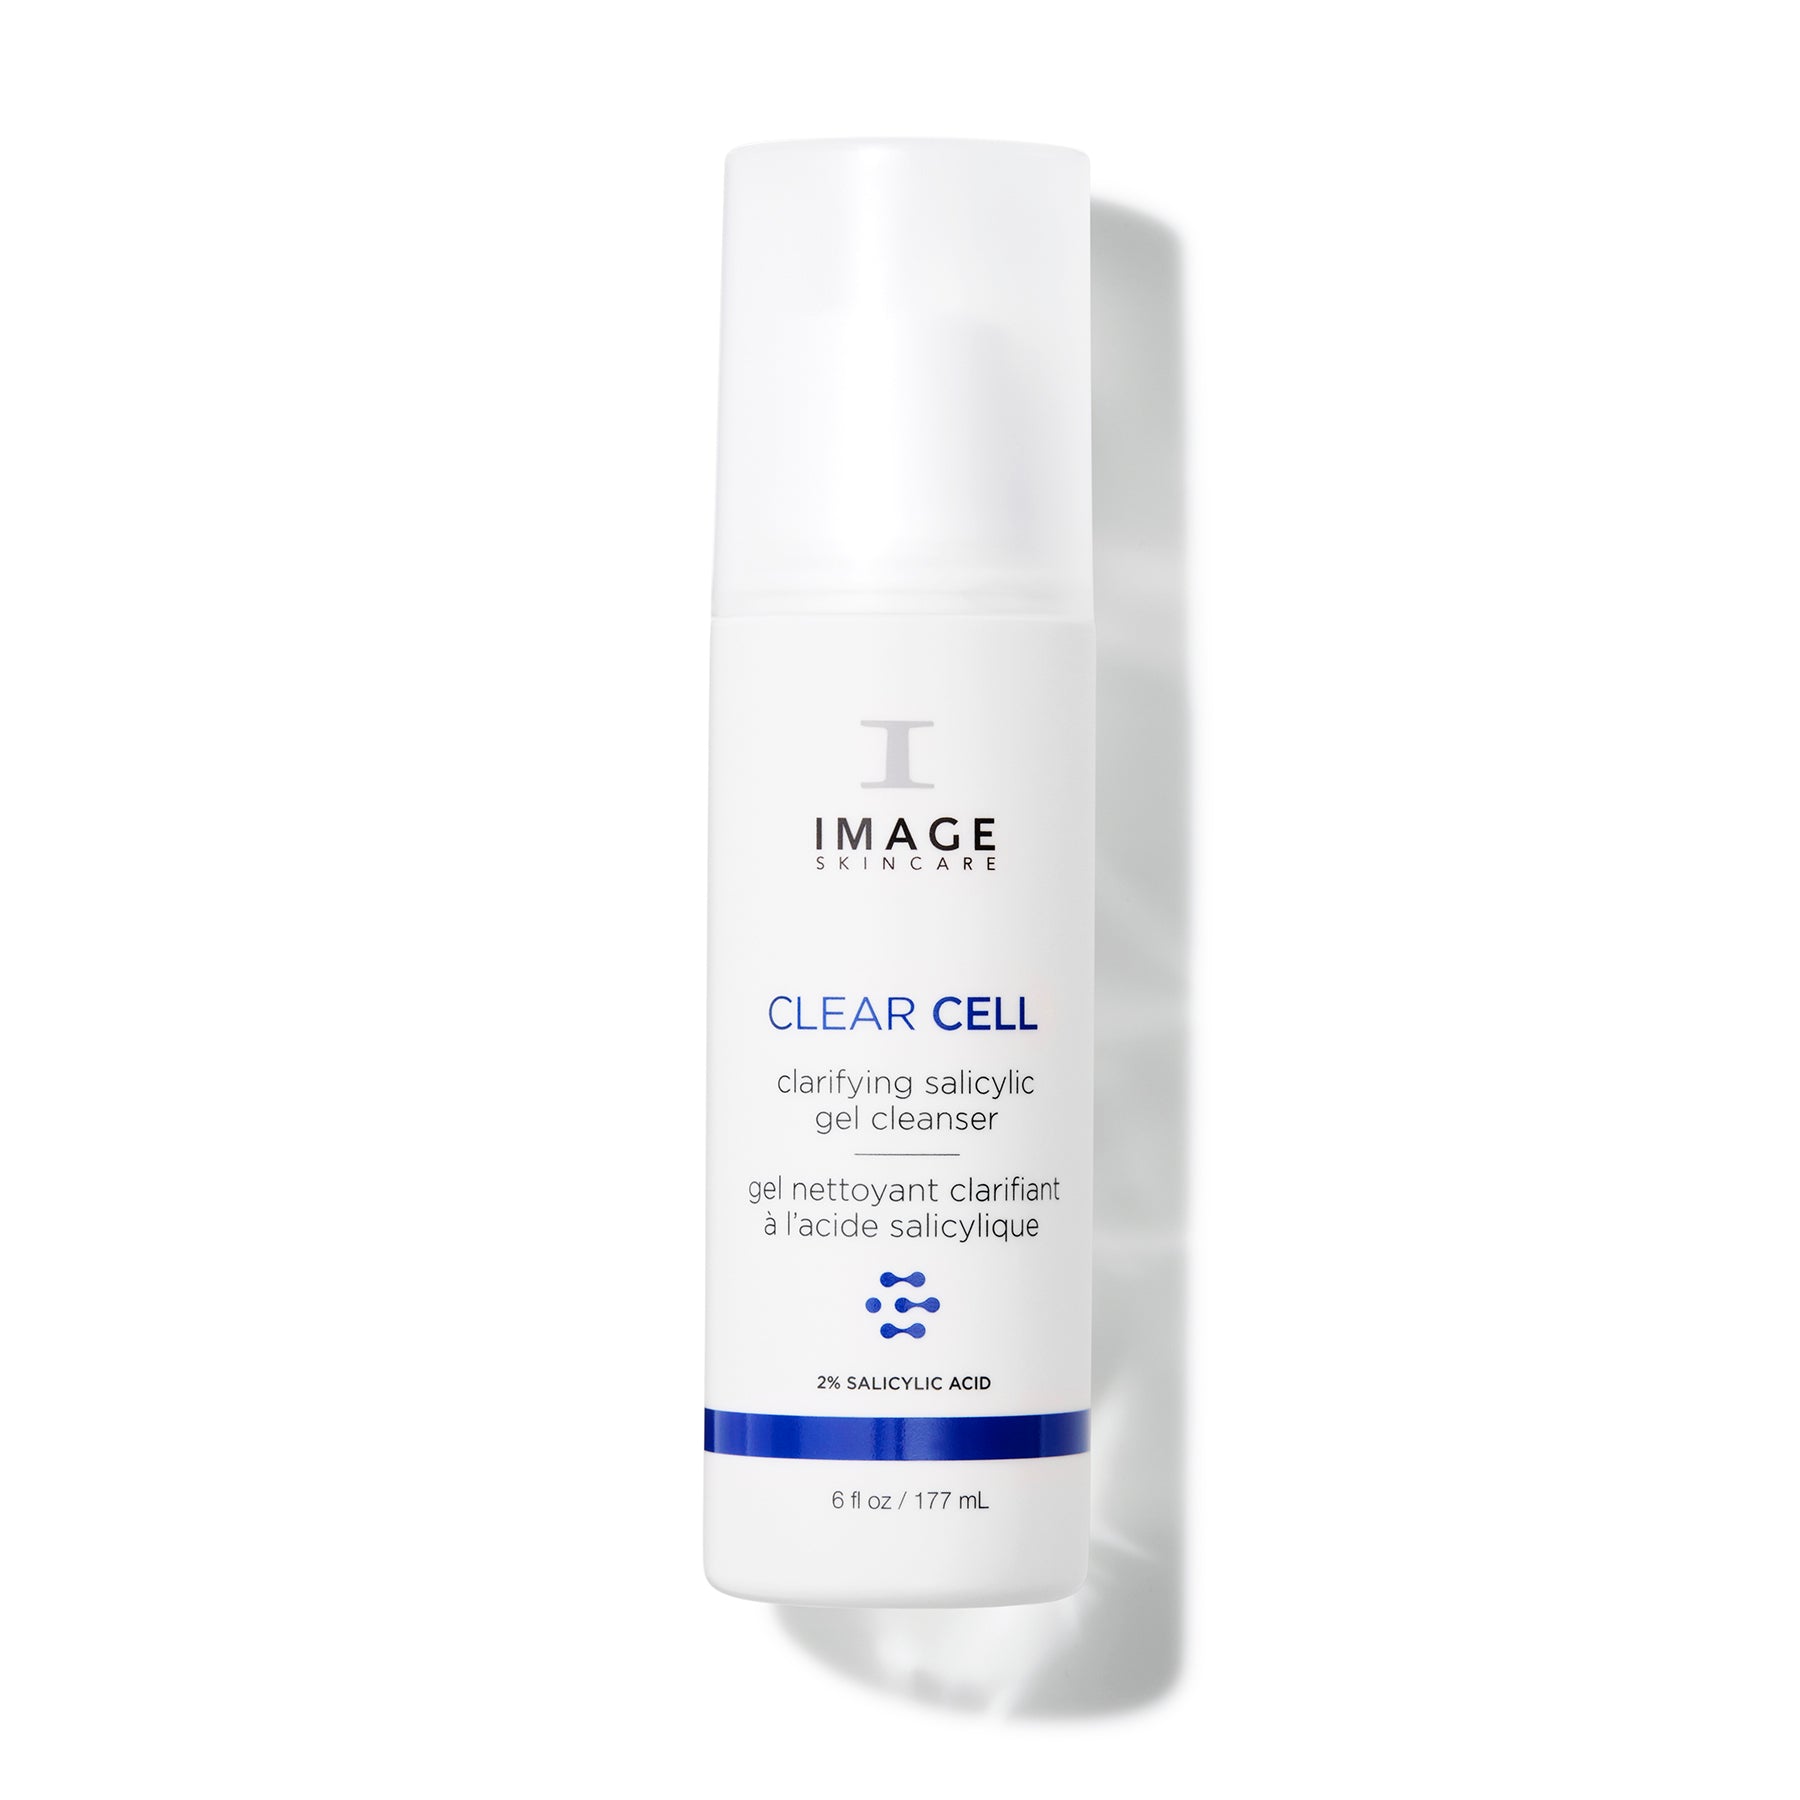 Image Clear Cell Gel Cleanser